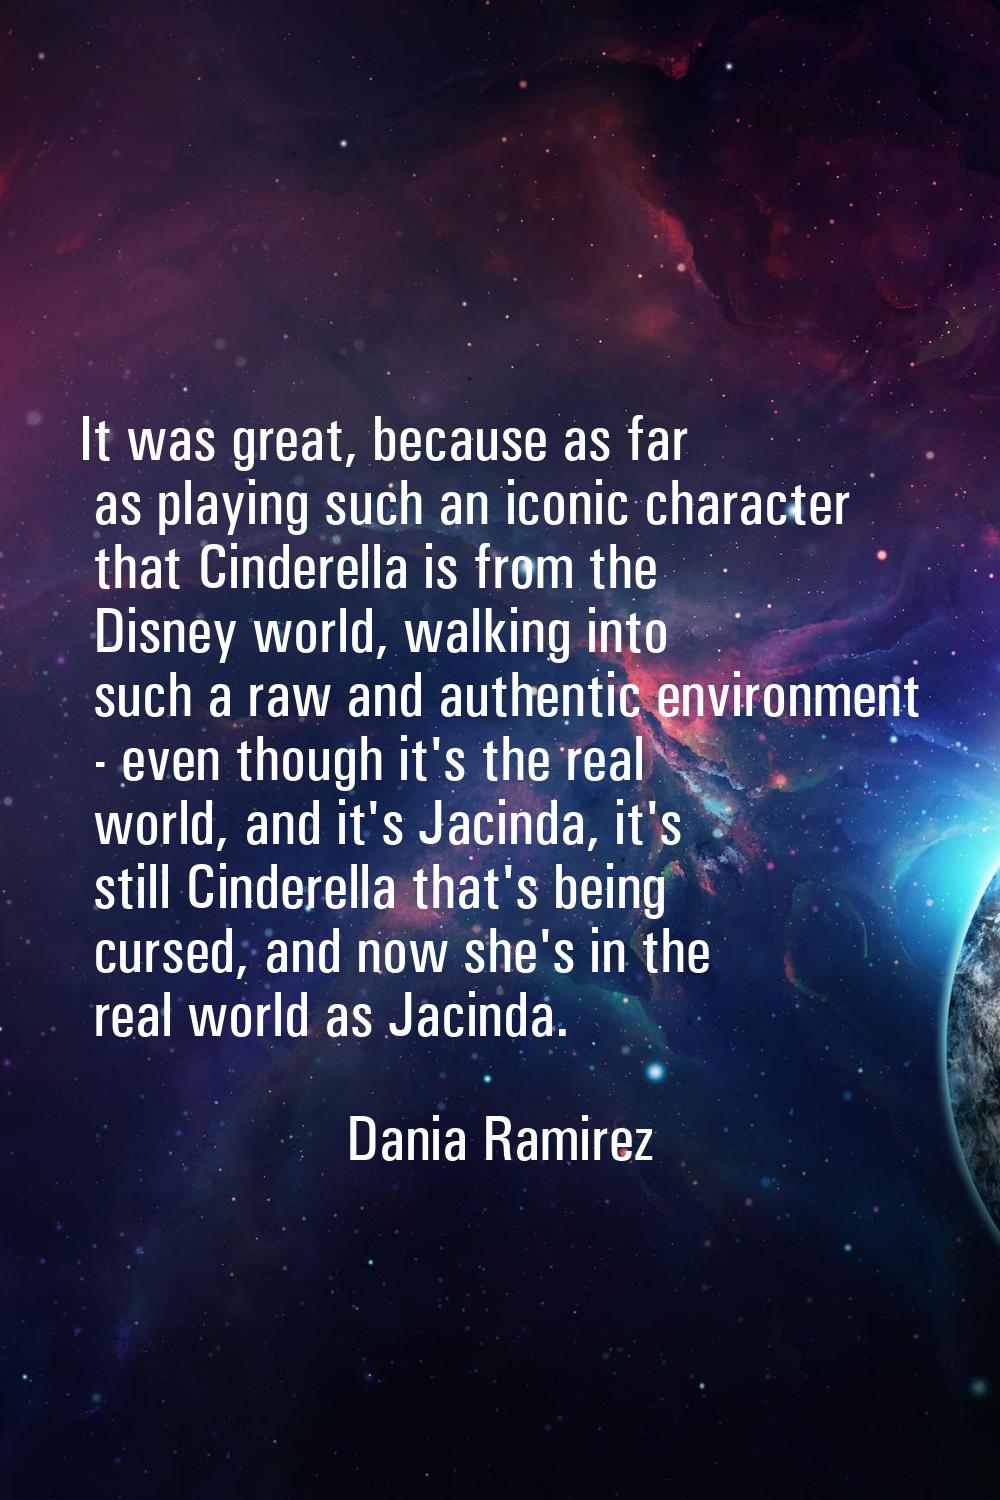 It was great, because as far as playing such an iconic character that Cinderella is from the Disney